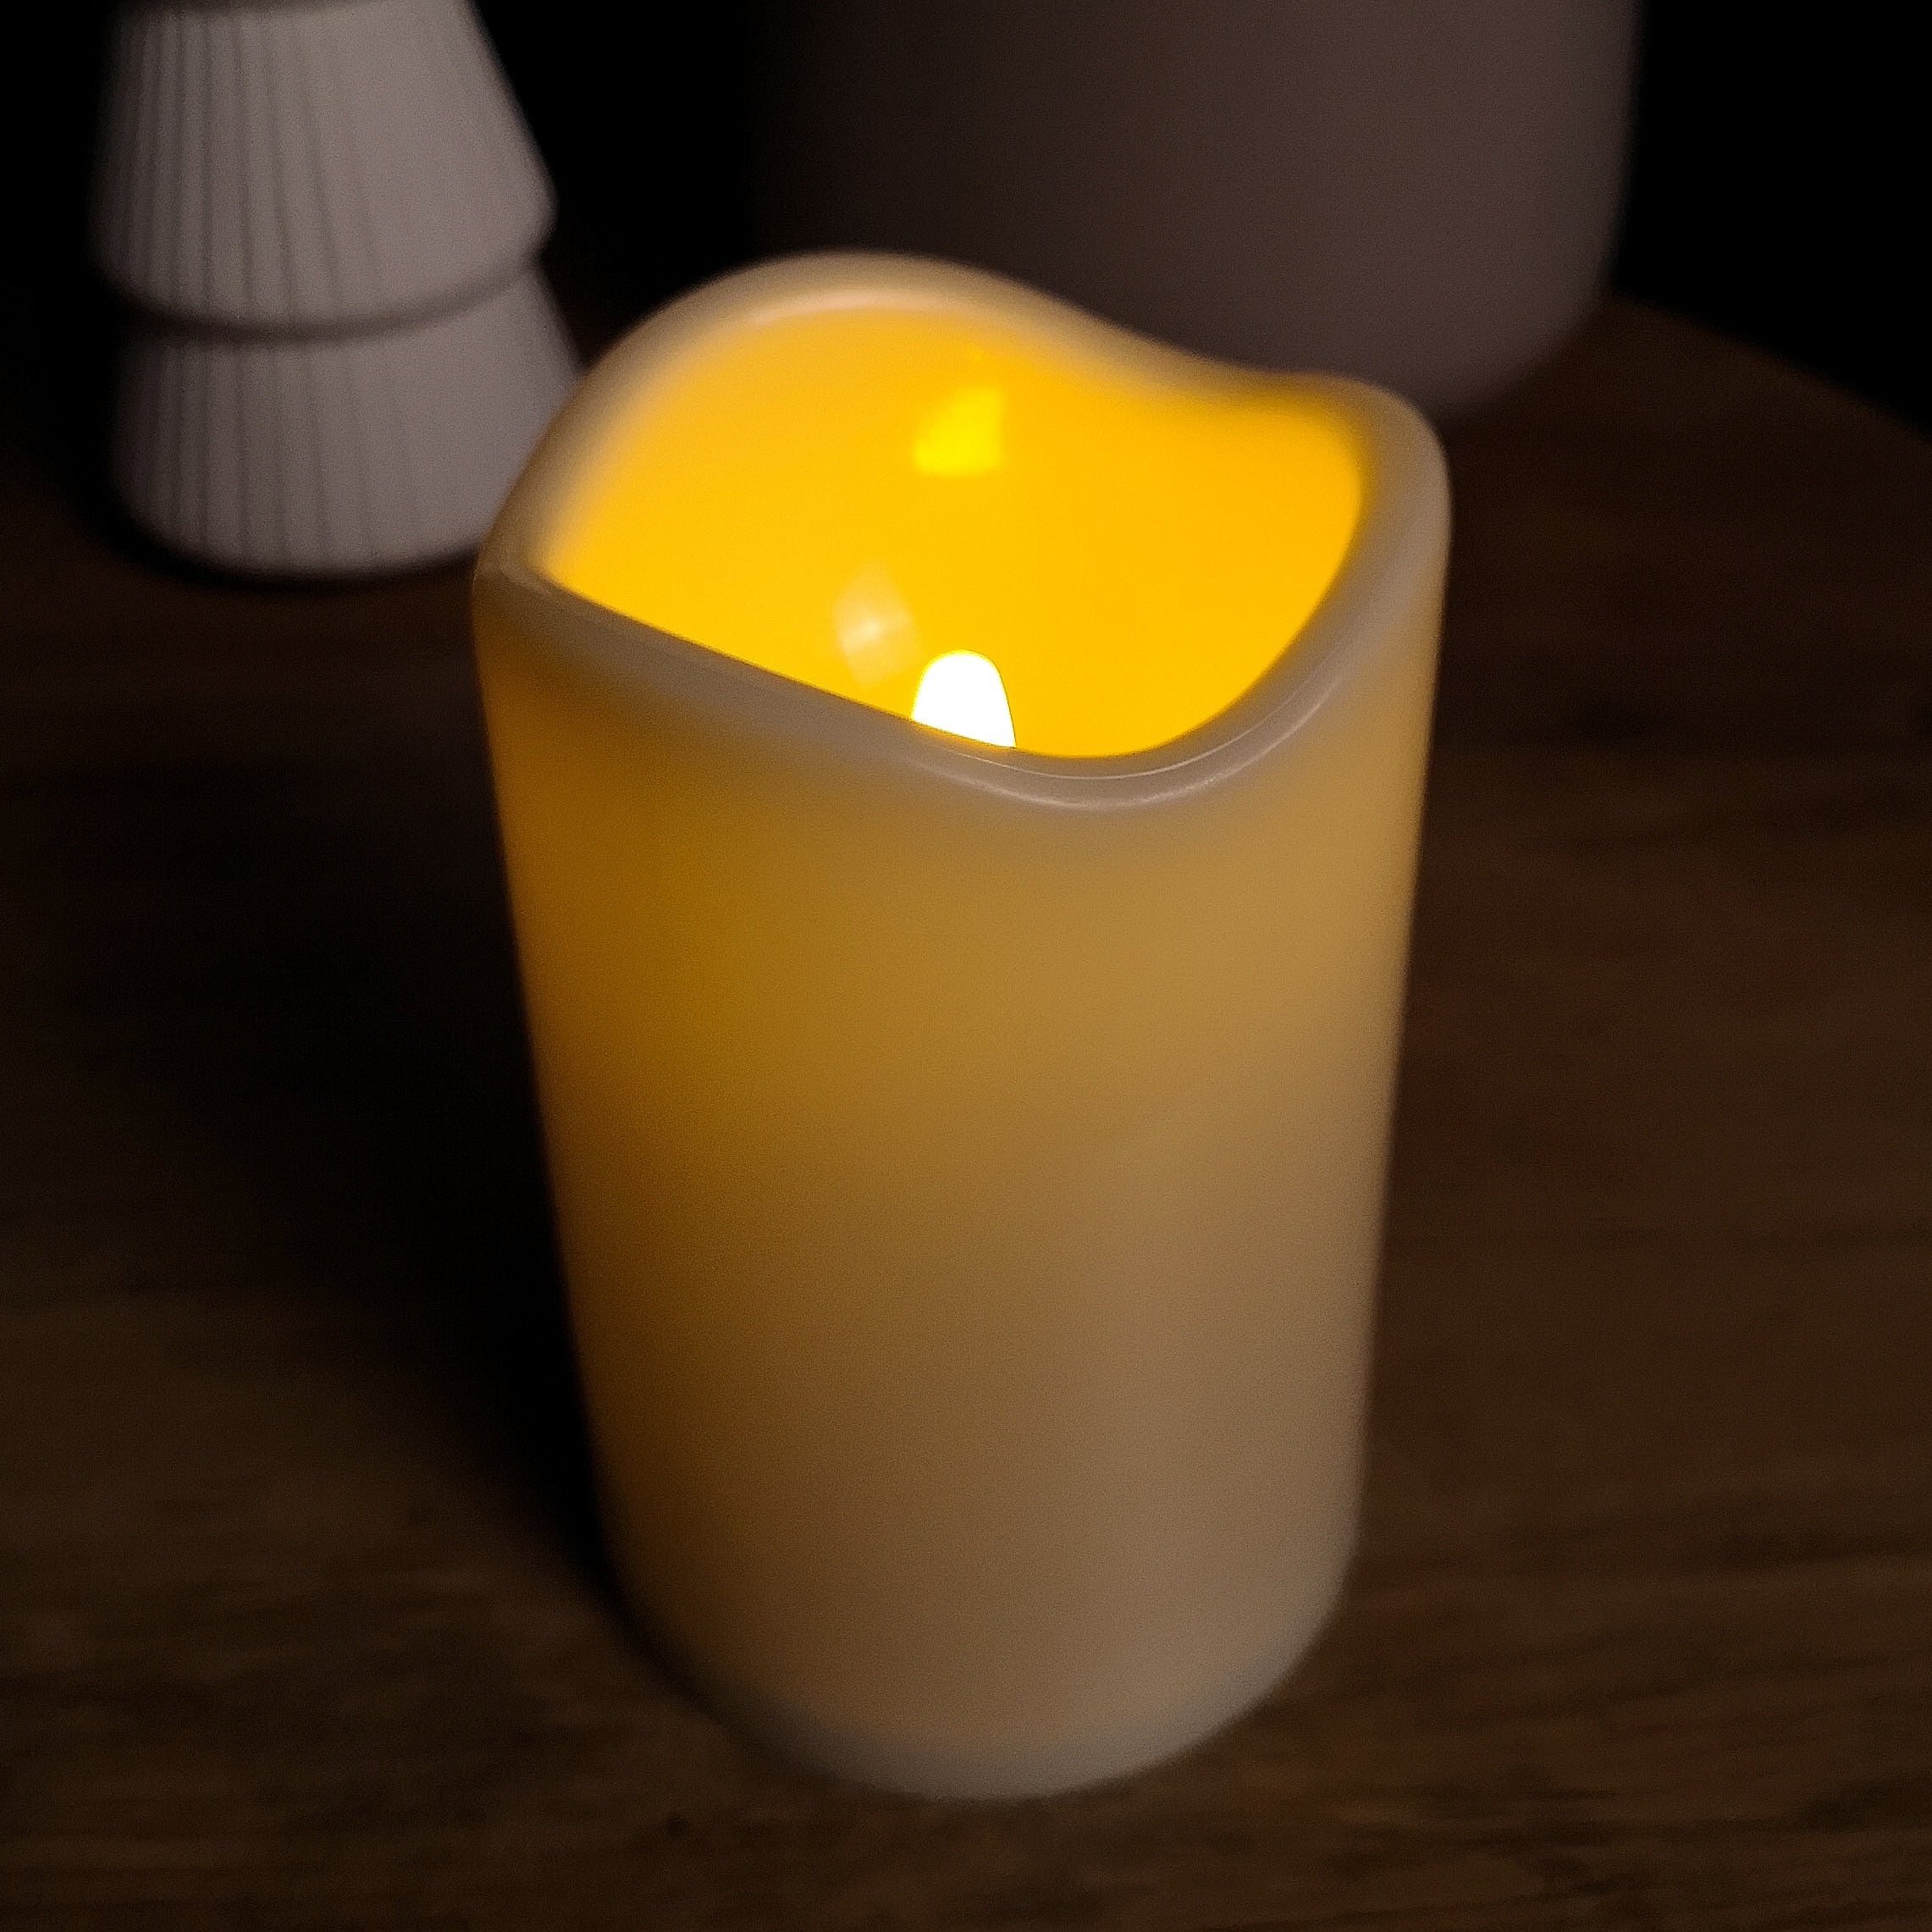 11cm Battery Operated Cream Flickering Flameless LED Candle